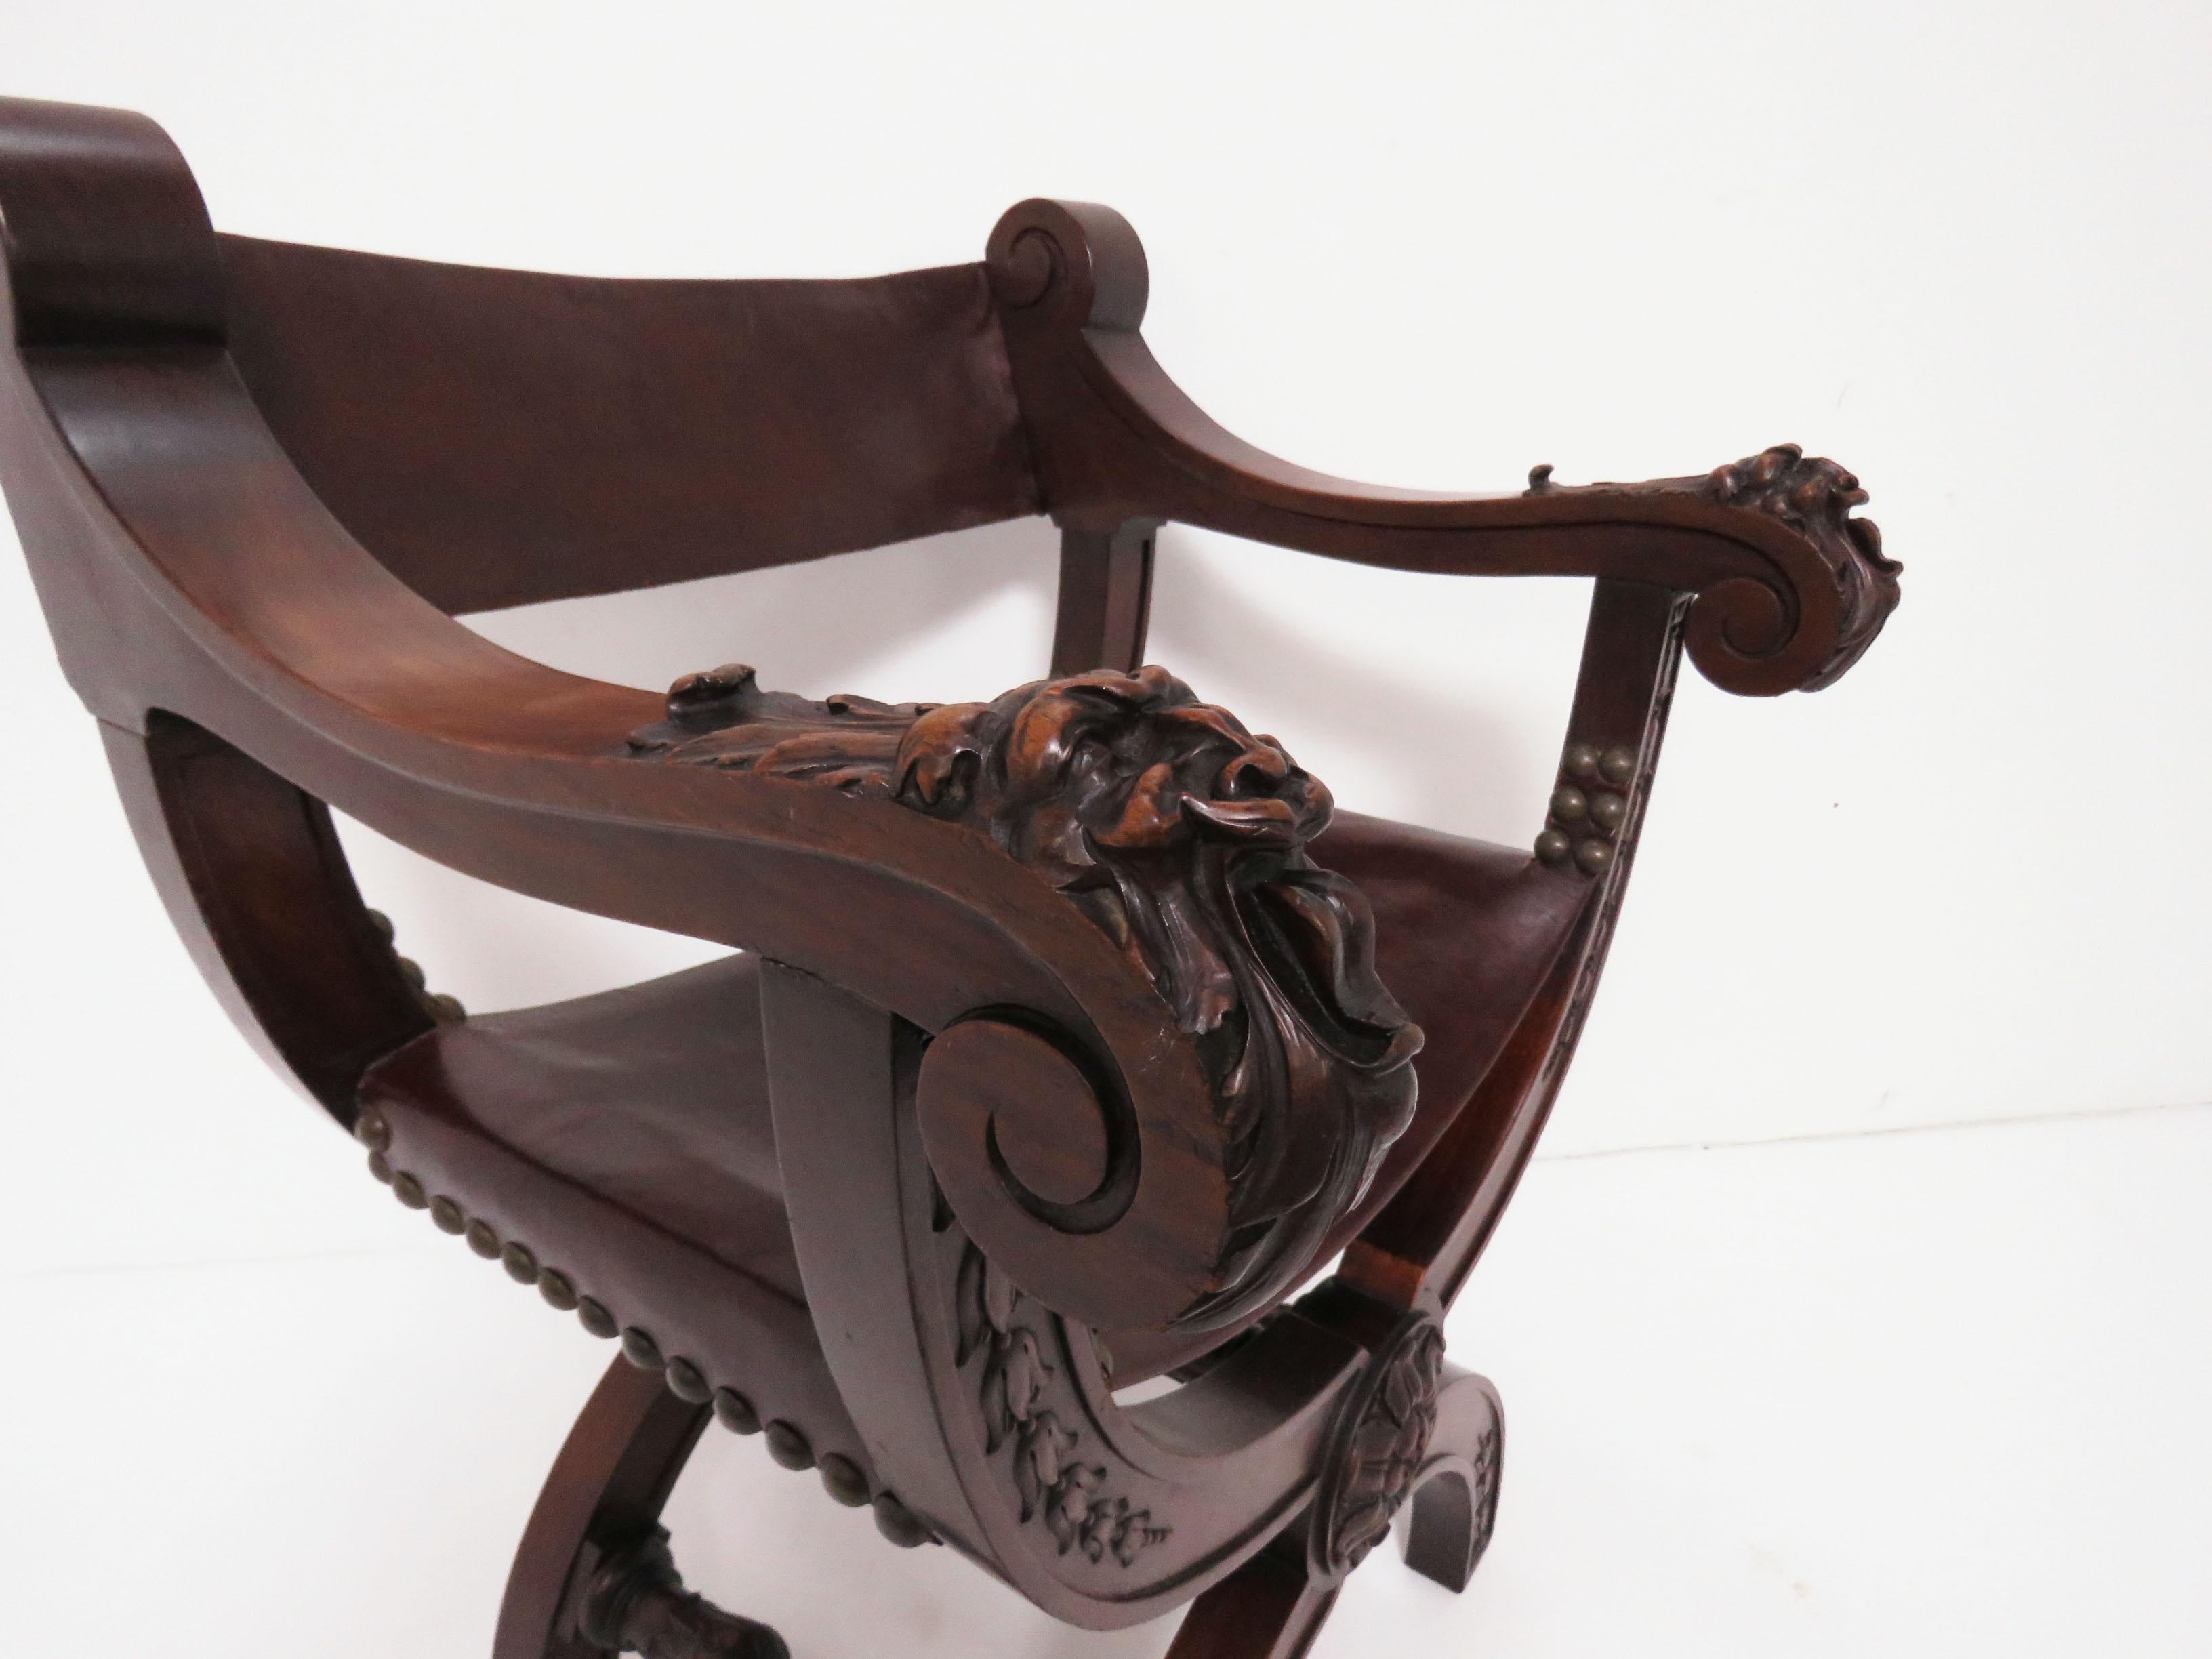 A late 19th century carved mahogany curule chair with sling seat and back in cordovan leather. Features fantastically carved griffins at the arm rests with bas-relief garlands to the lower portion, center medallion and heavily turned stretchers and